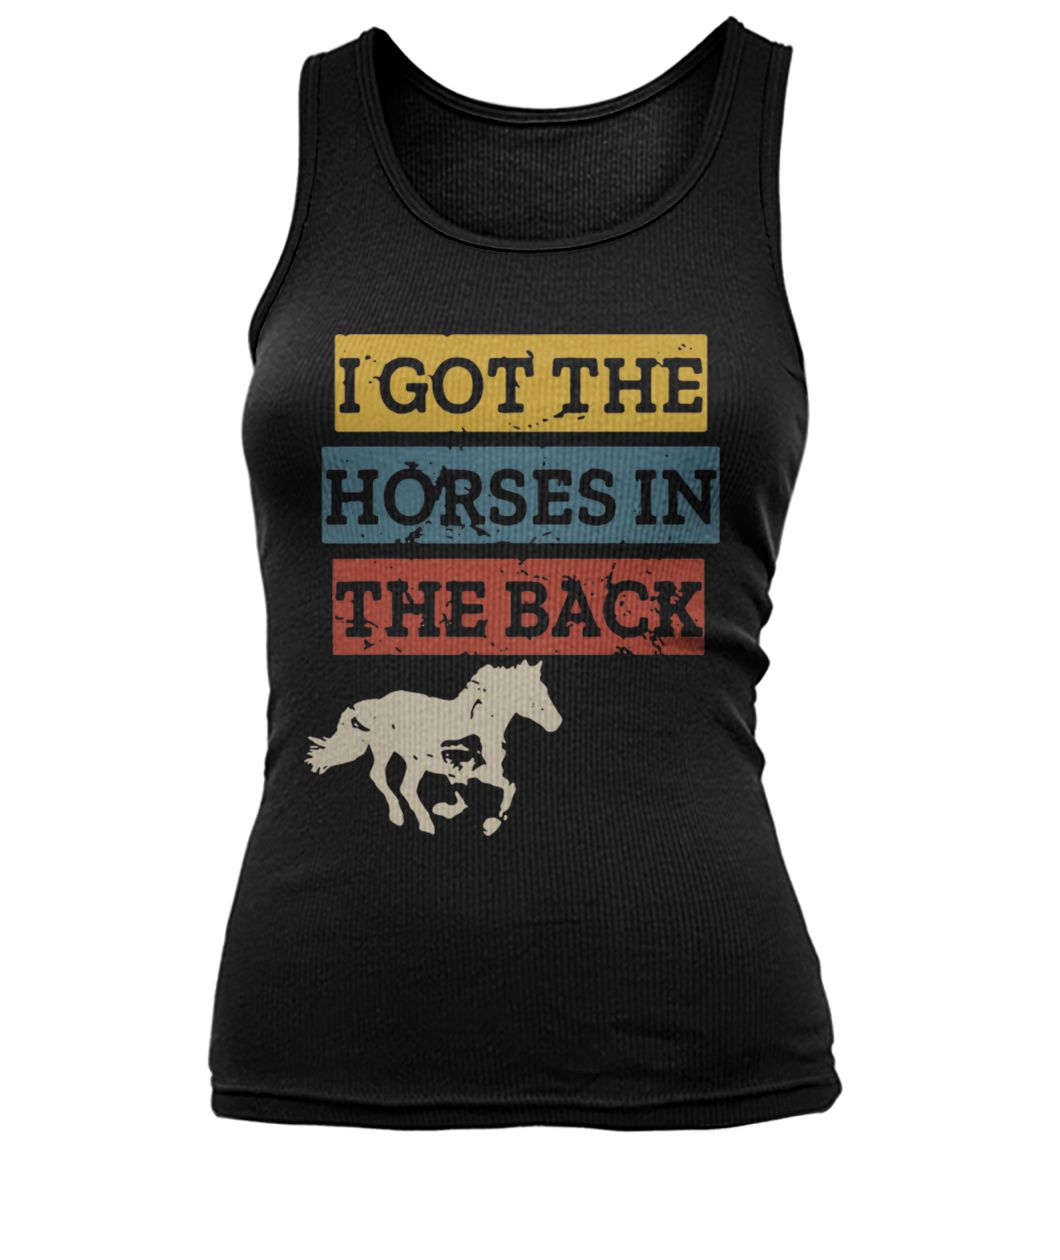 I got the horses in the back women's tank top